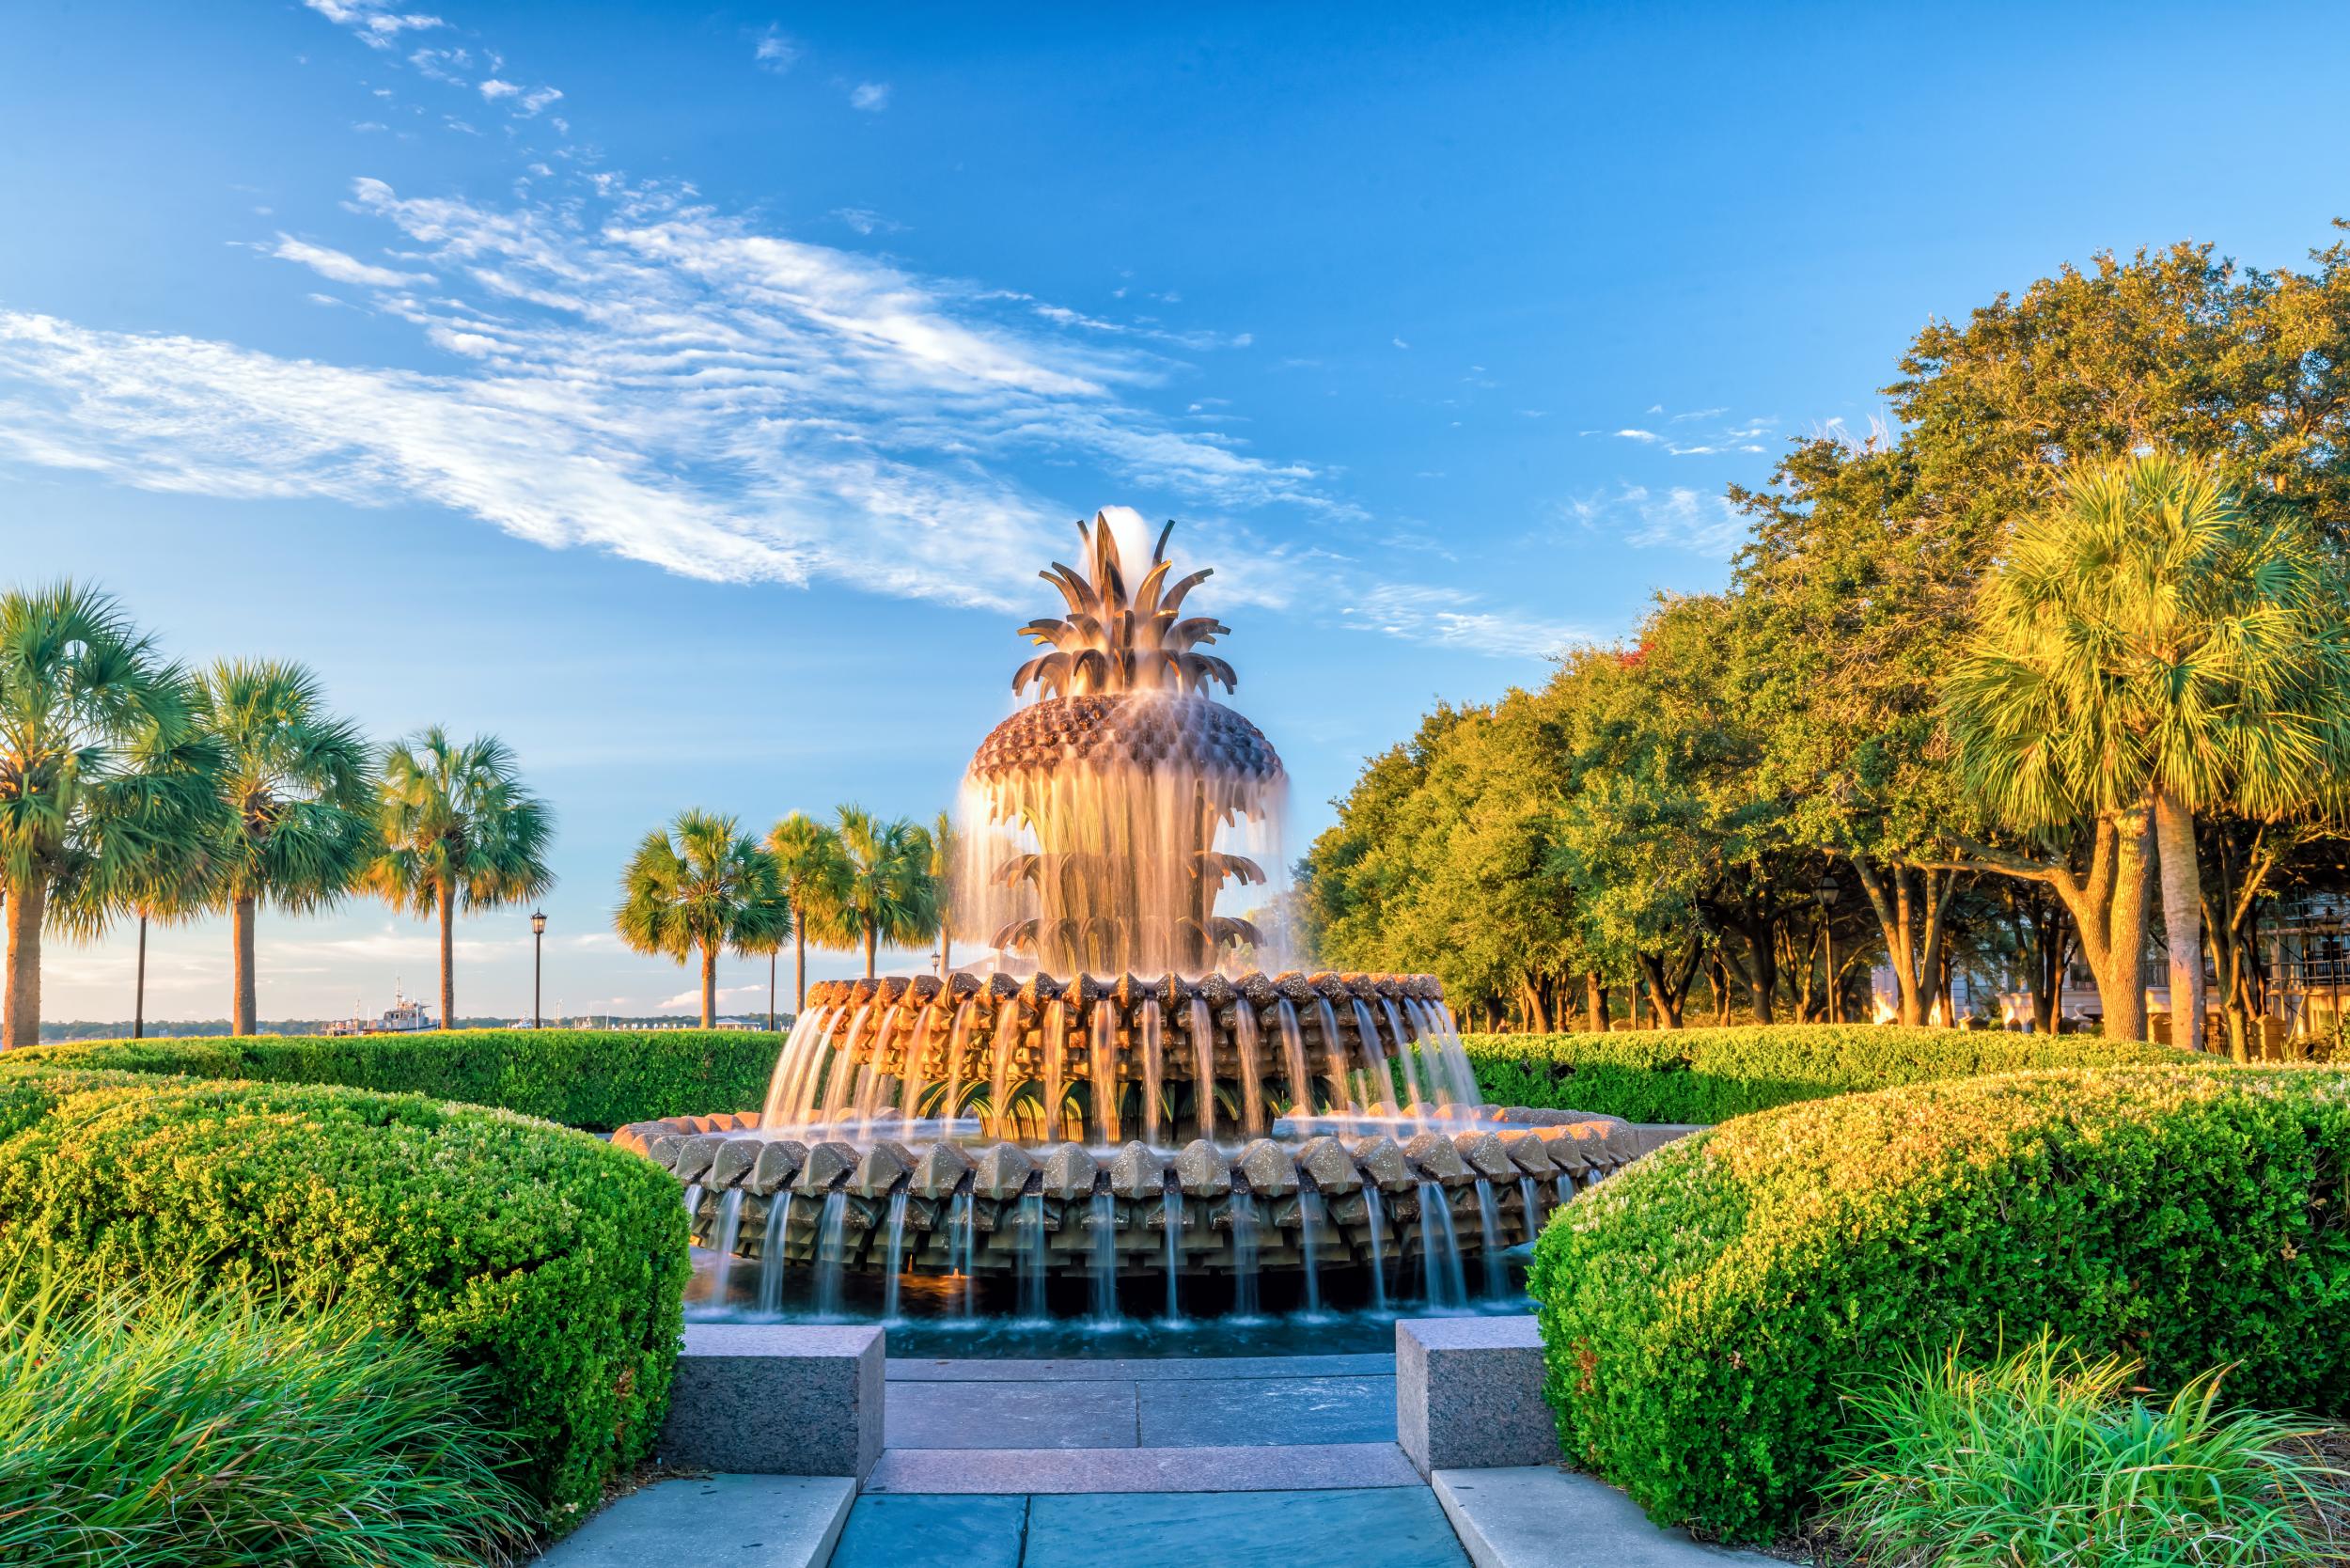 The pineapple is an emblem of Charleston